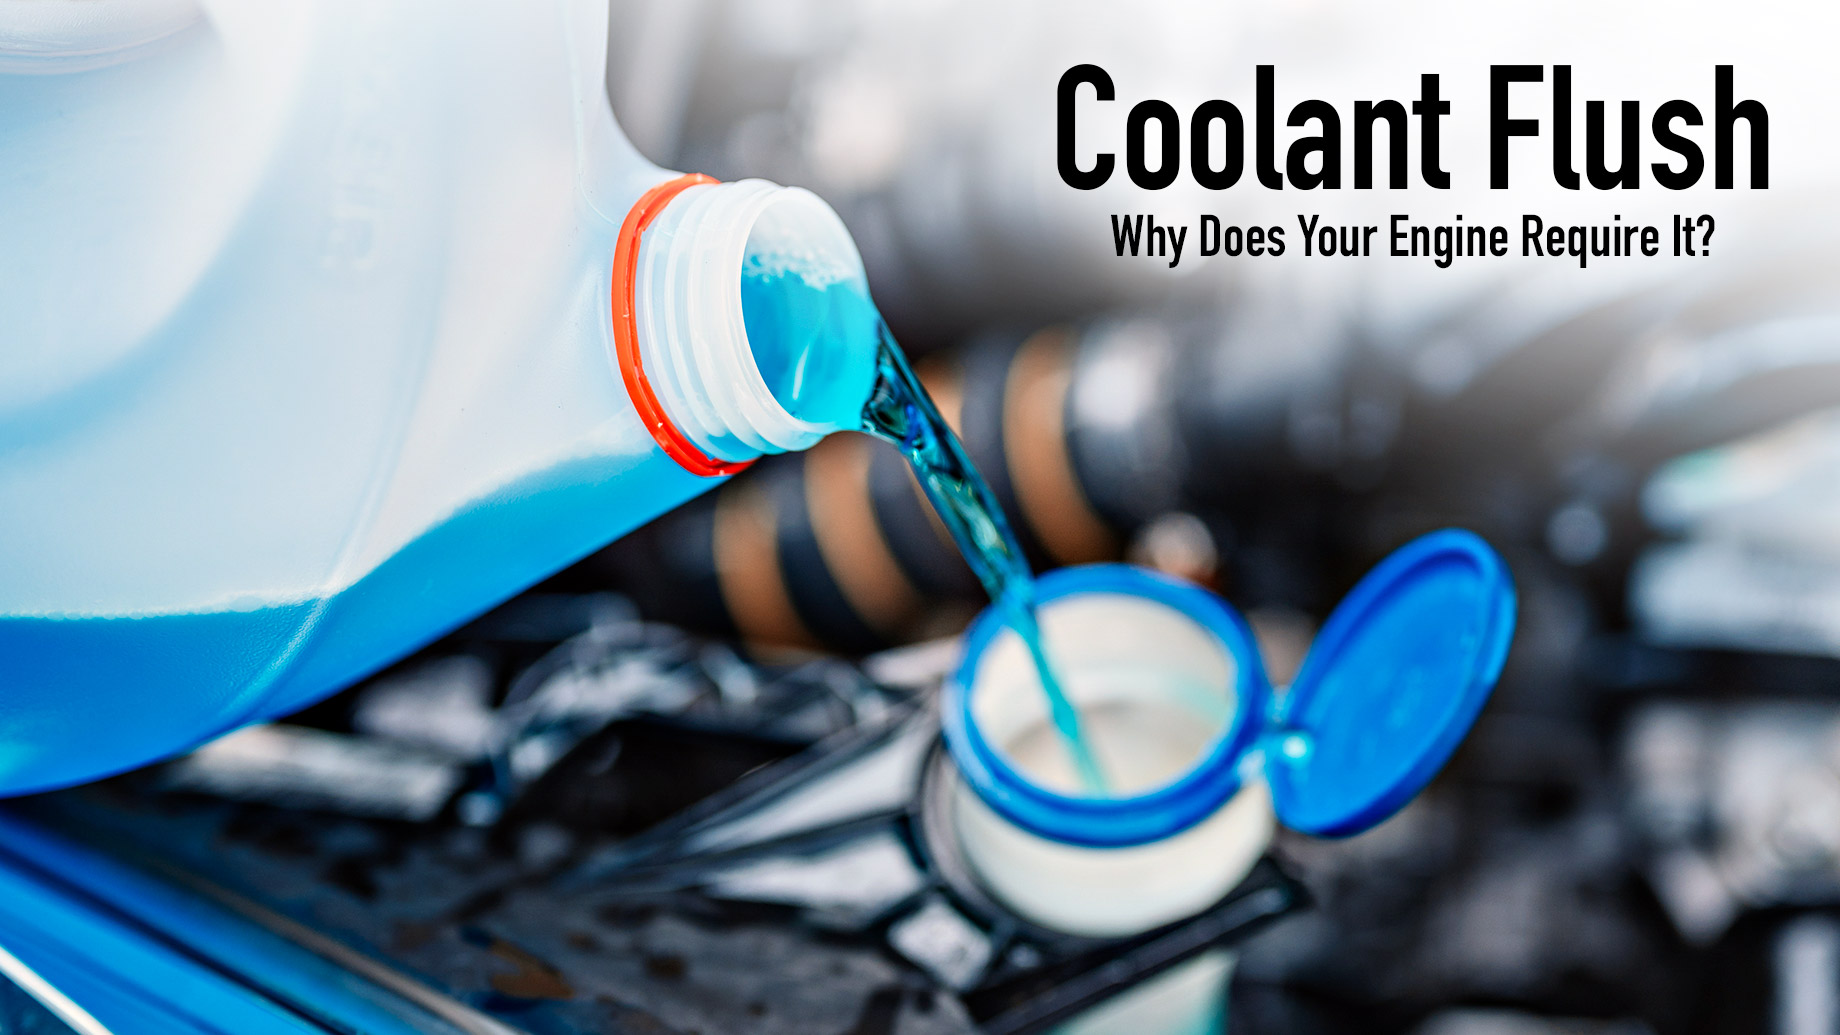 Coolant Flush - Why Does Your Engine Require It?